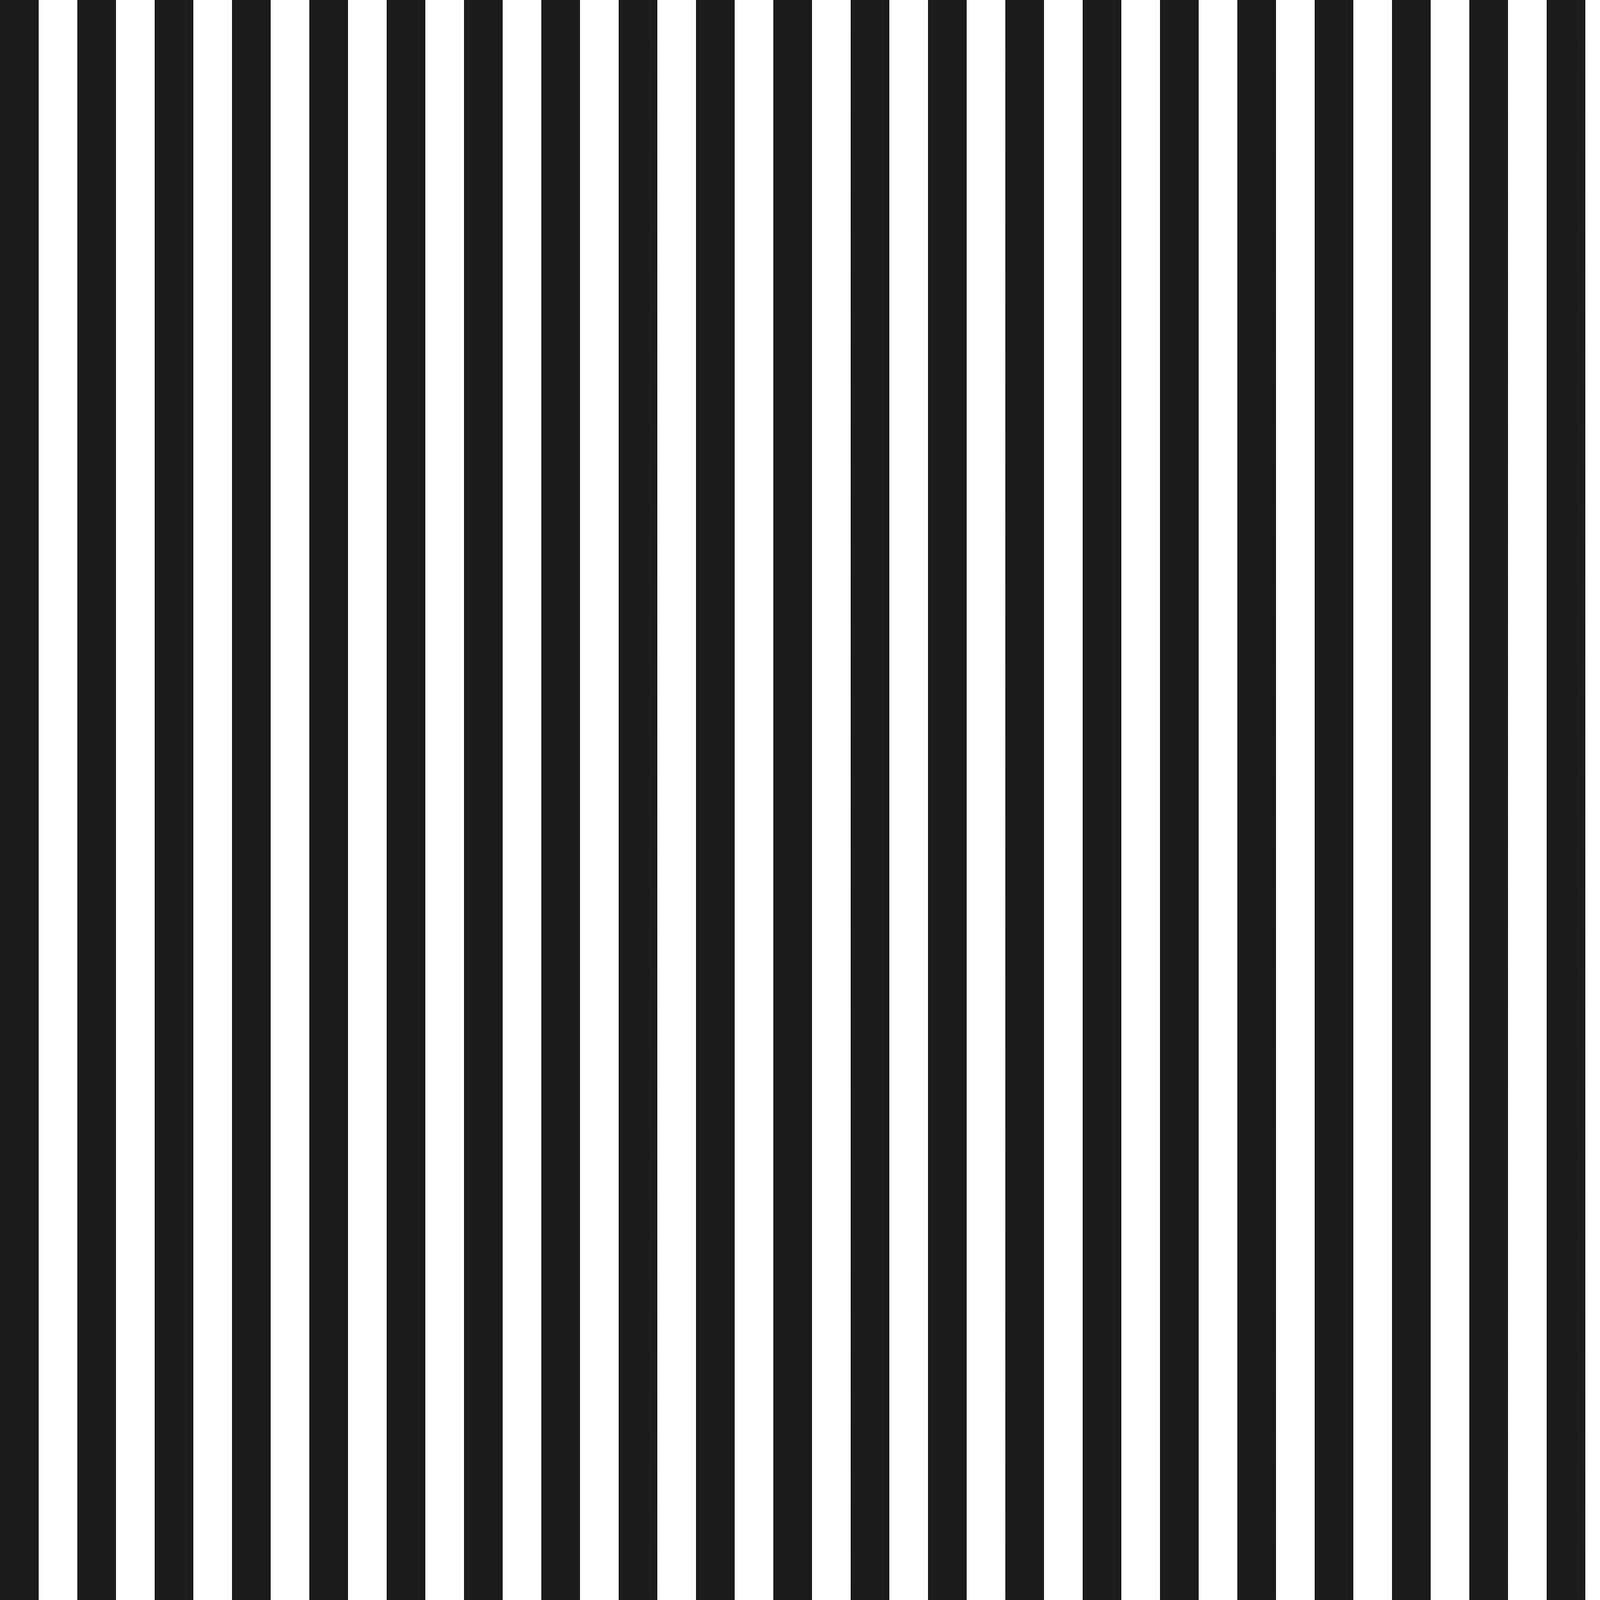 iphone screen black and white stripes